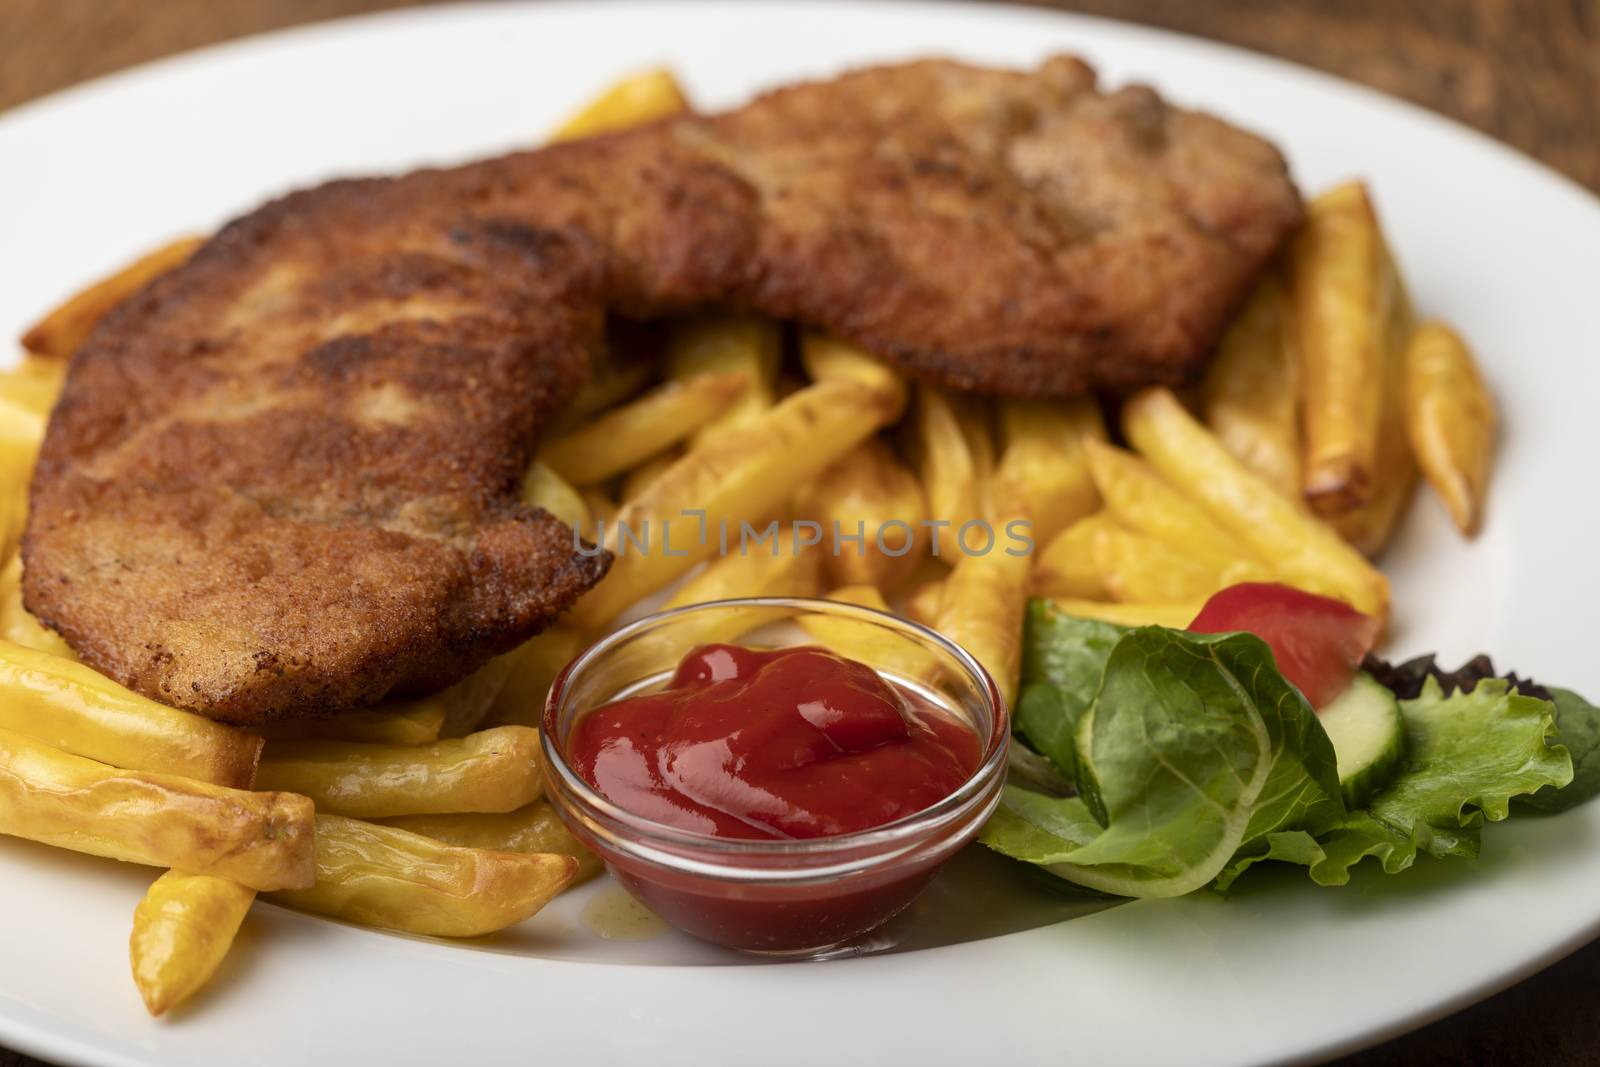 wiener schnitzel with french fries by bernjuer